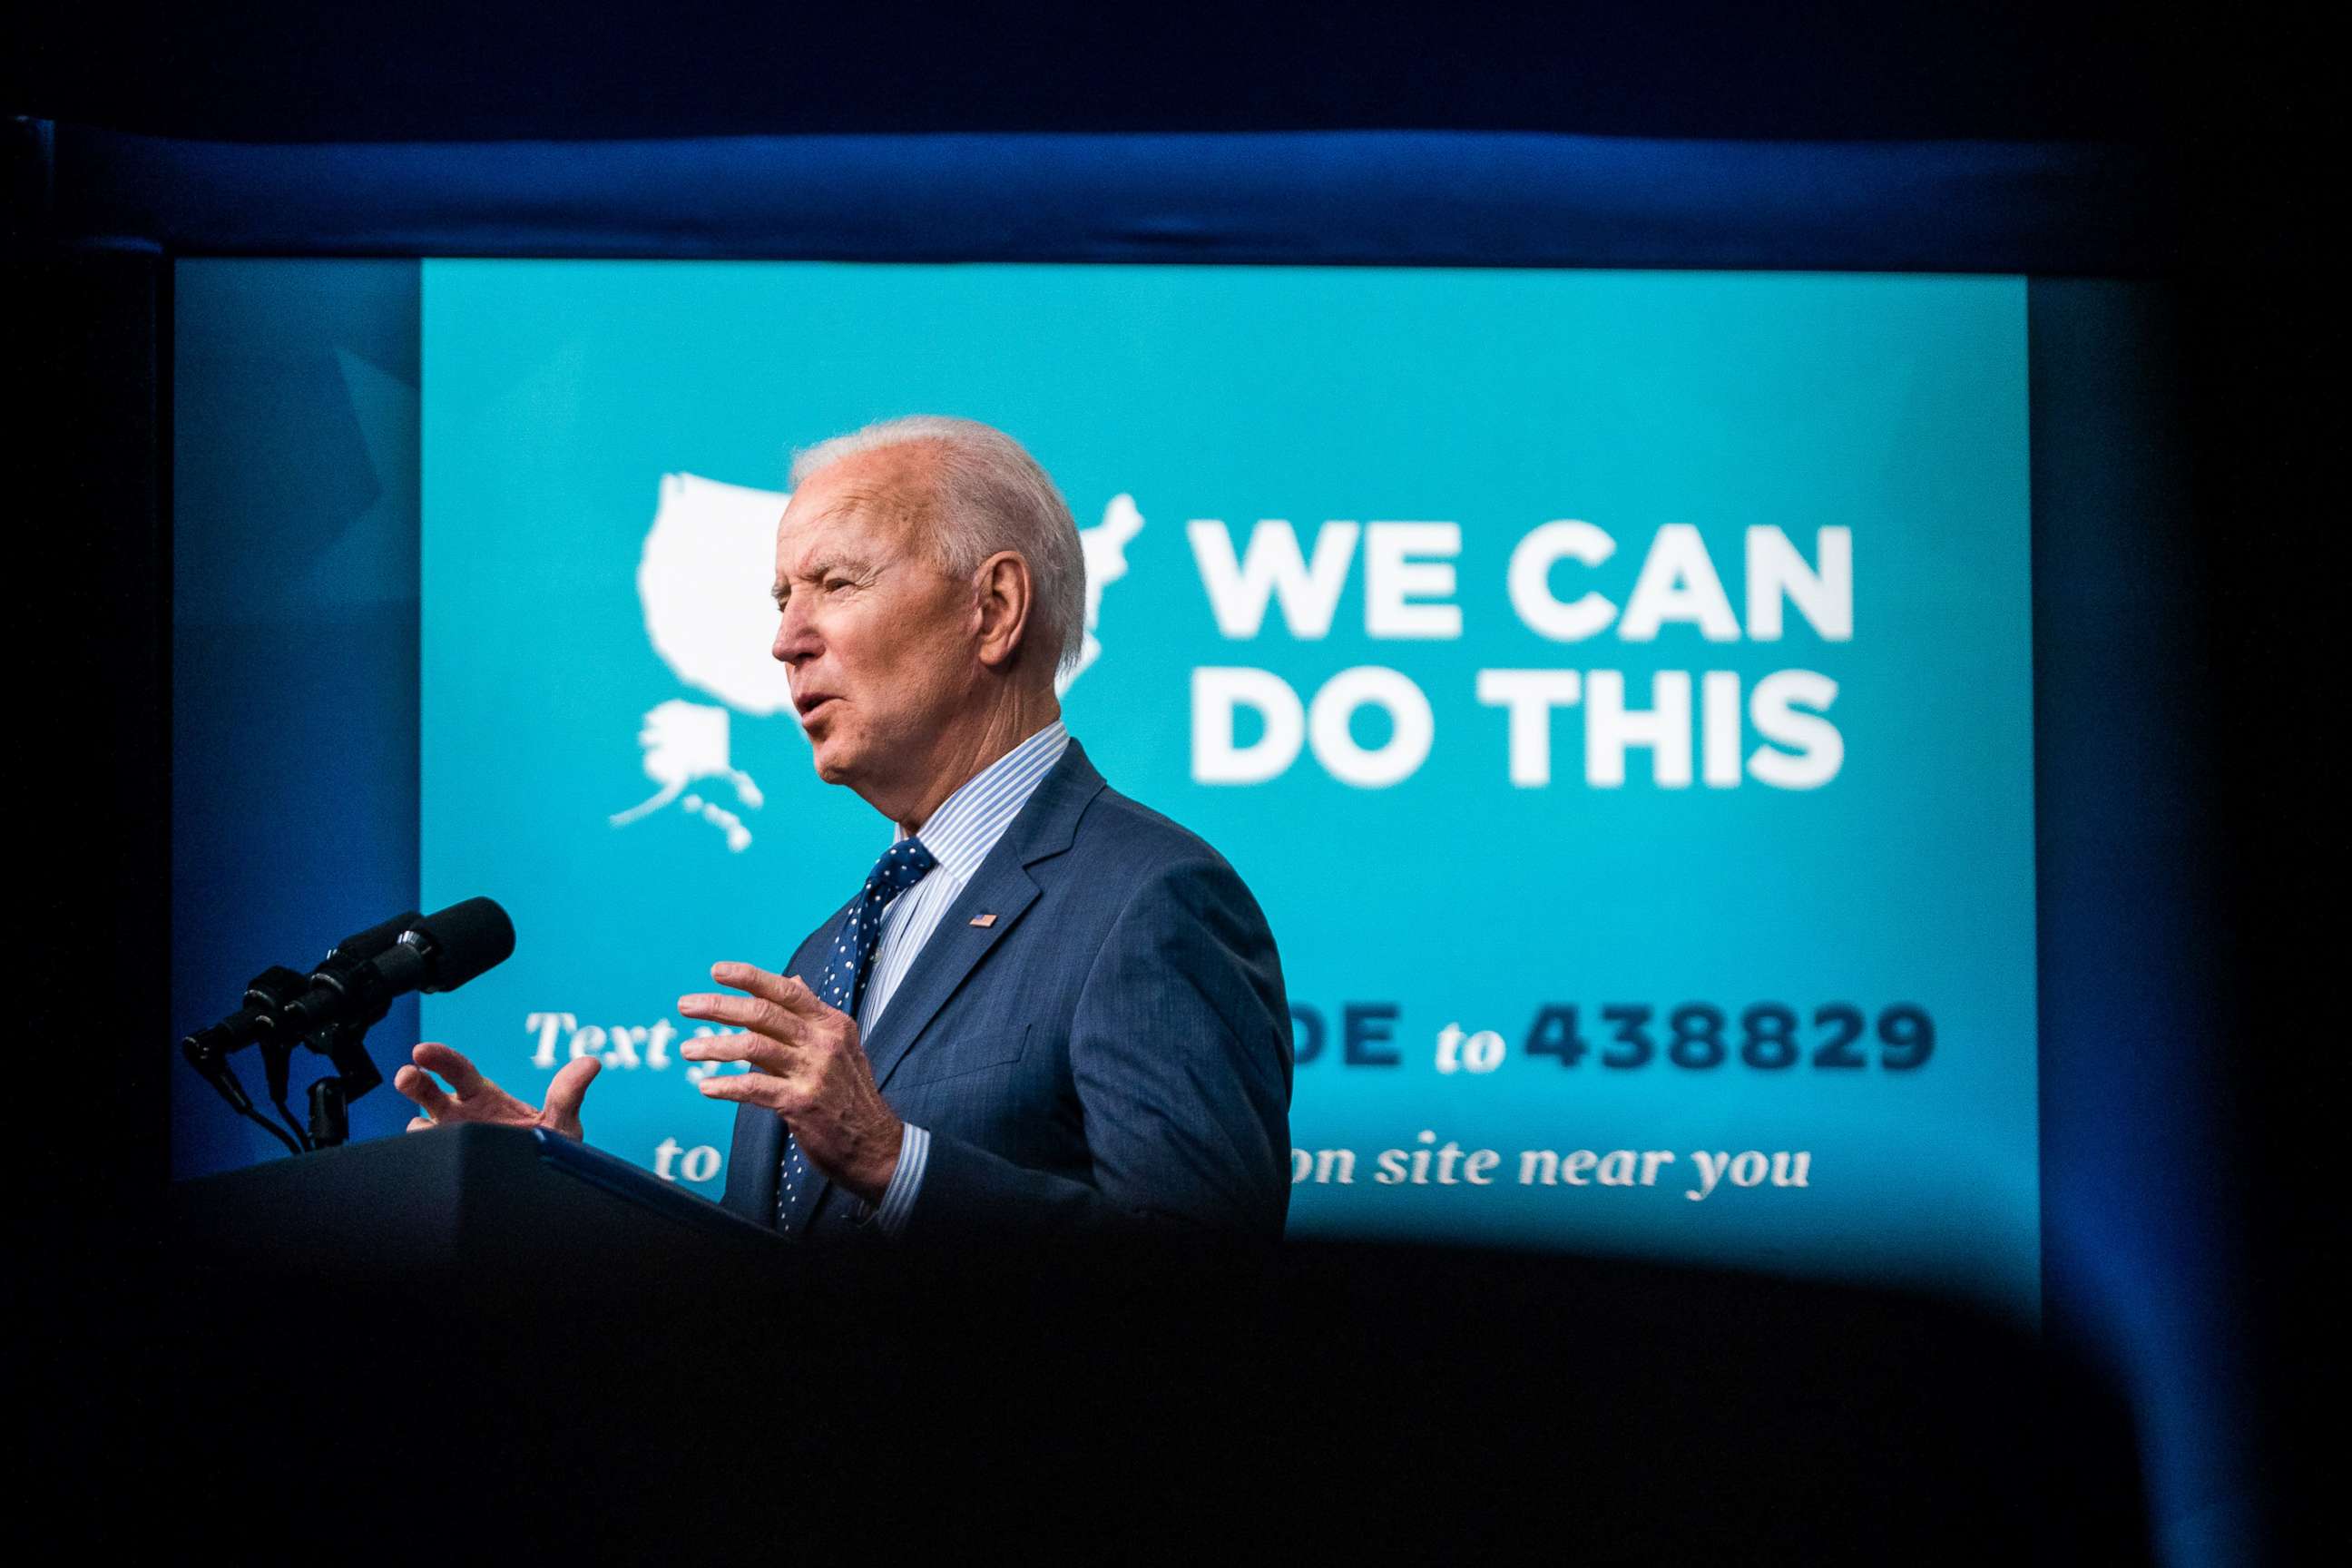 PHOTO: President Joe Biden makes remarks regarding his Covid-19 response, announcing plans to work with churches, colleges, businesses and celebrities to boost coronavirus vaccinations in the U.S., on June 2, 2021 in Washington, D.C. 